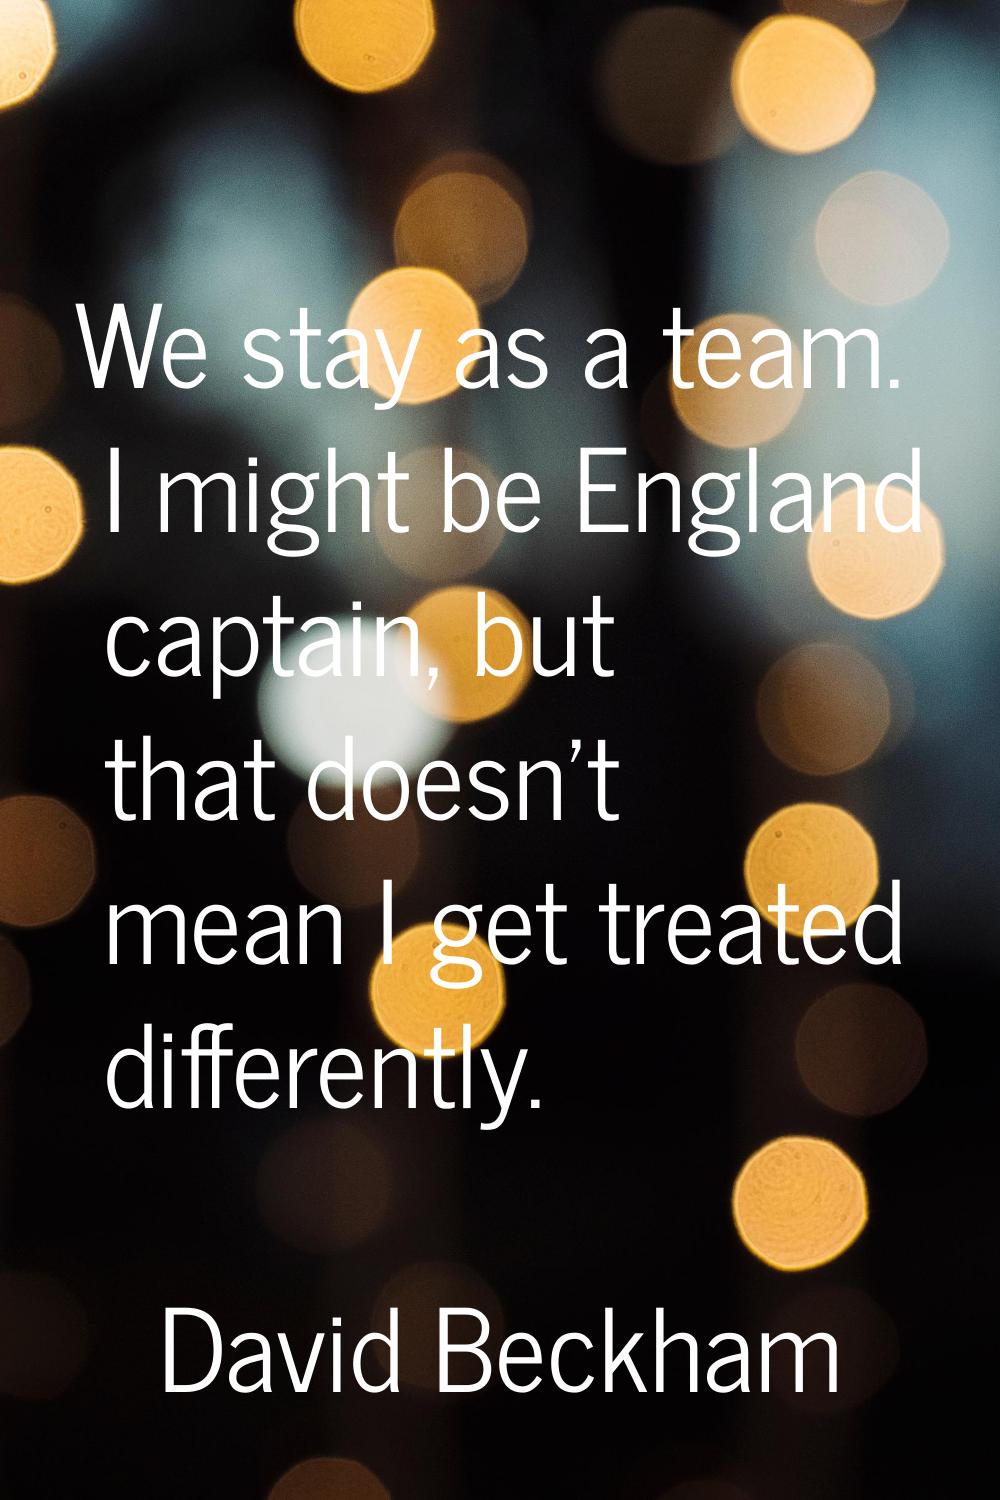 We stay as a team. I might be England captain, but that doesn't mean I get treated differently.